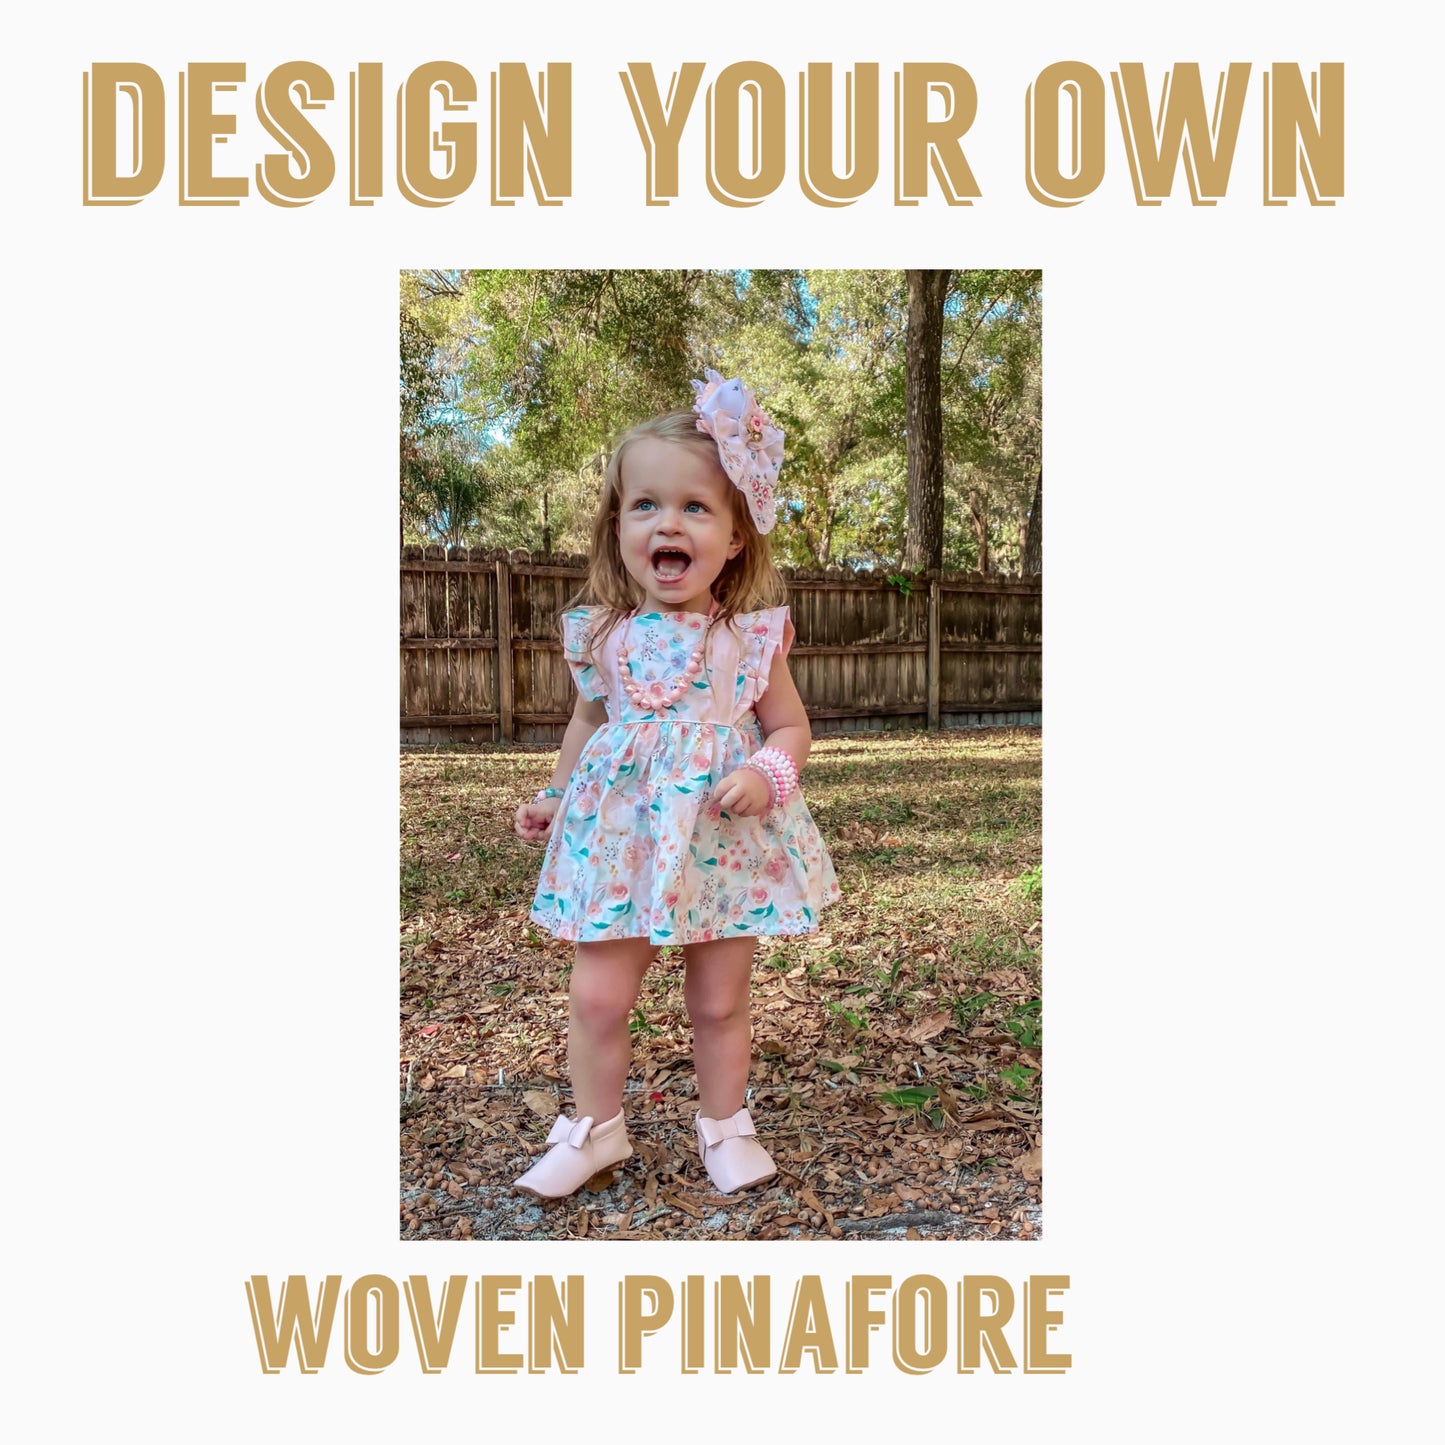 Design Your Own| Woven Pinafore Dress